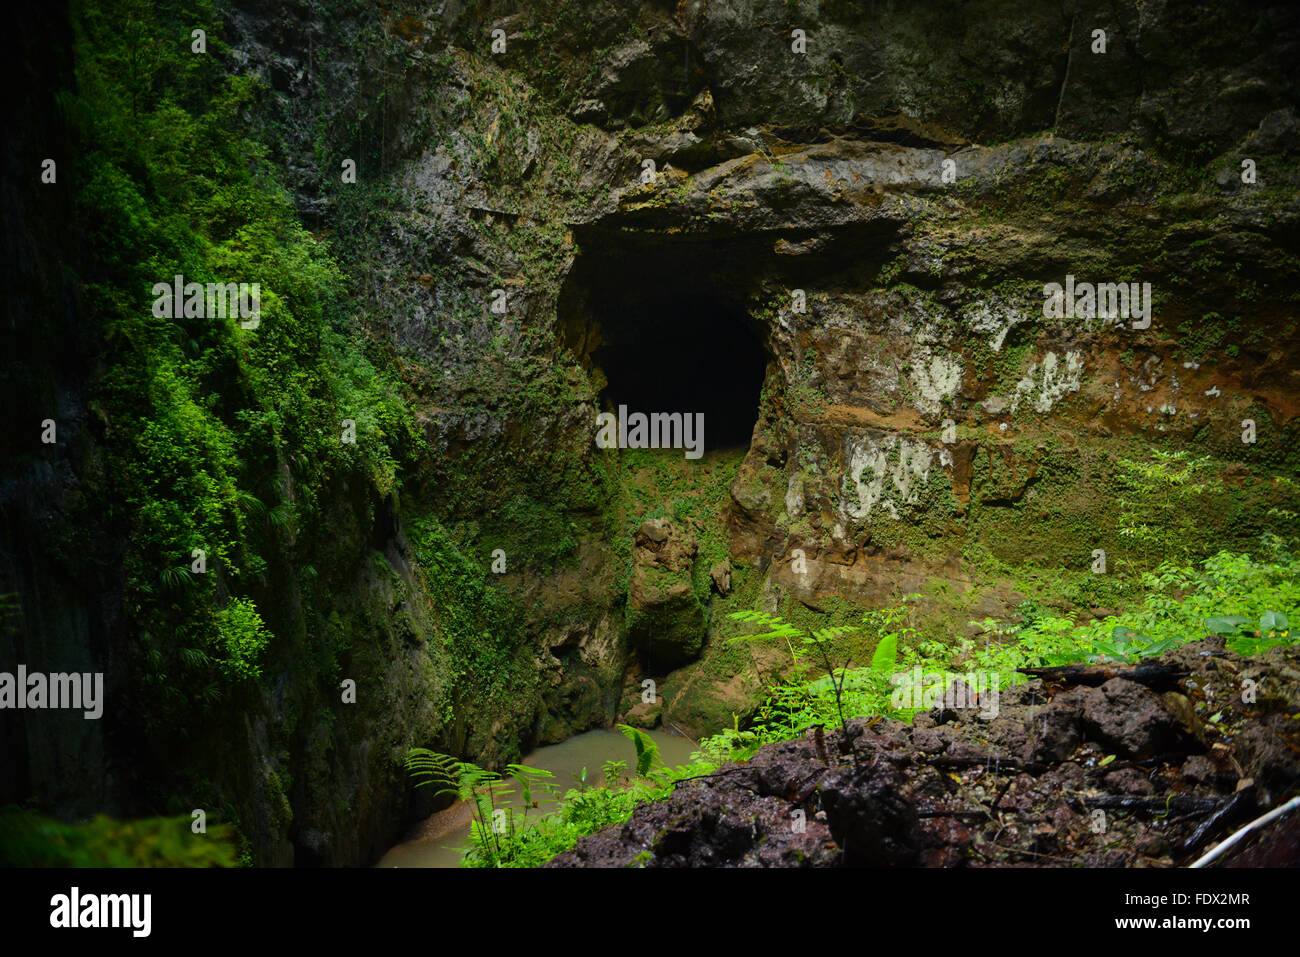 The Camuy River Cave Park. PUERTO RICO - Caribbean Island. US territory. Stock Photo